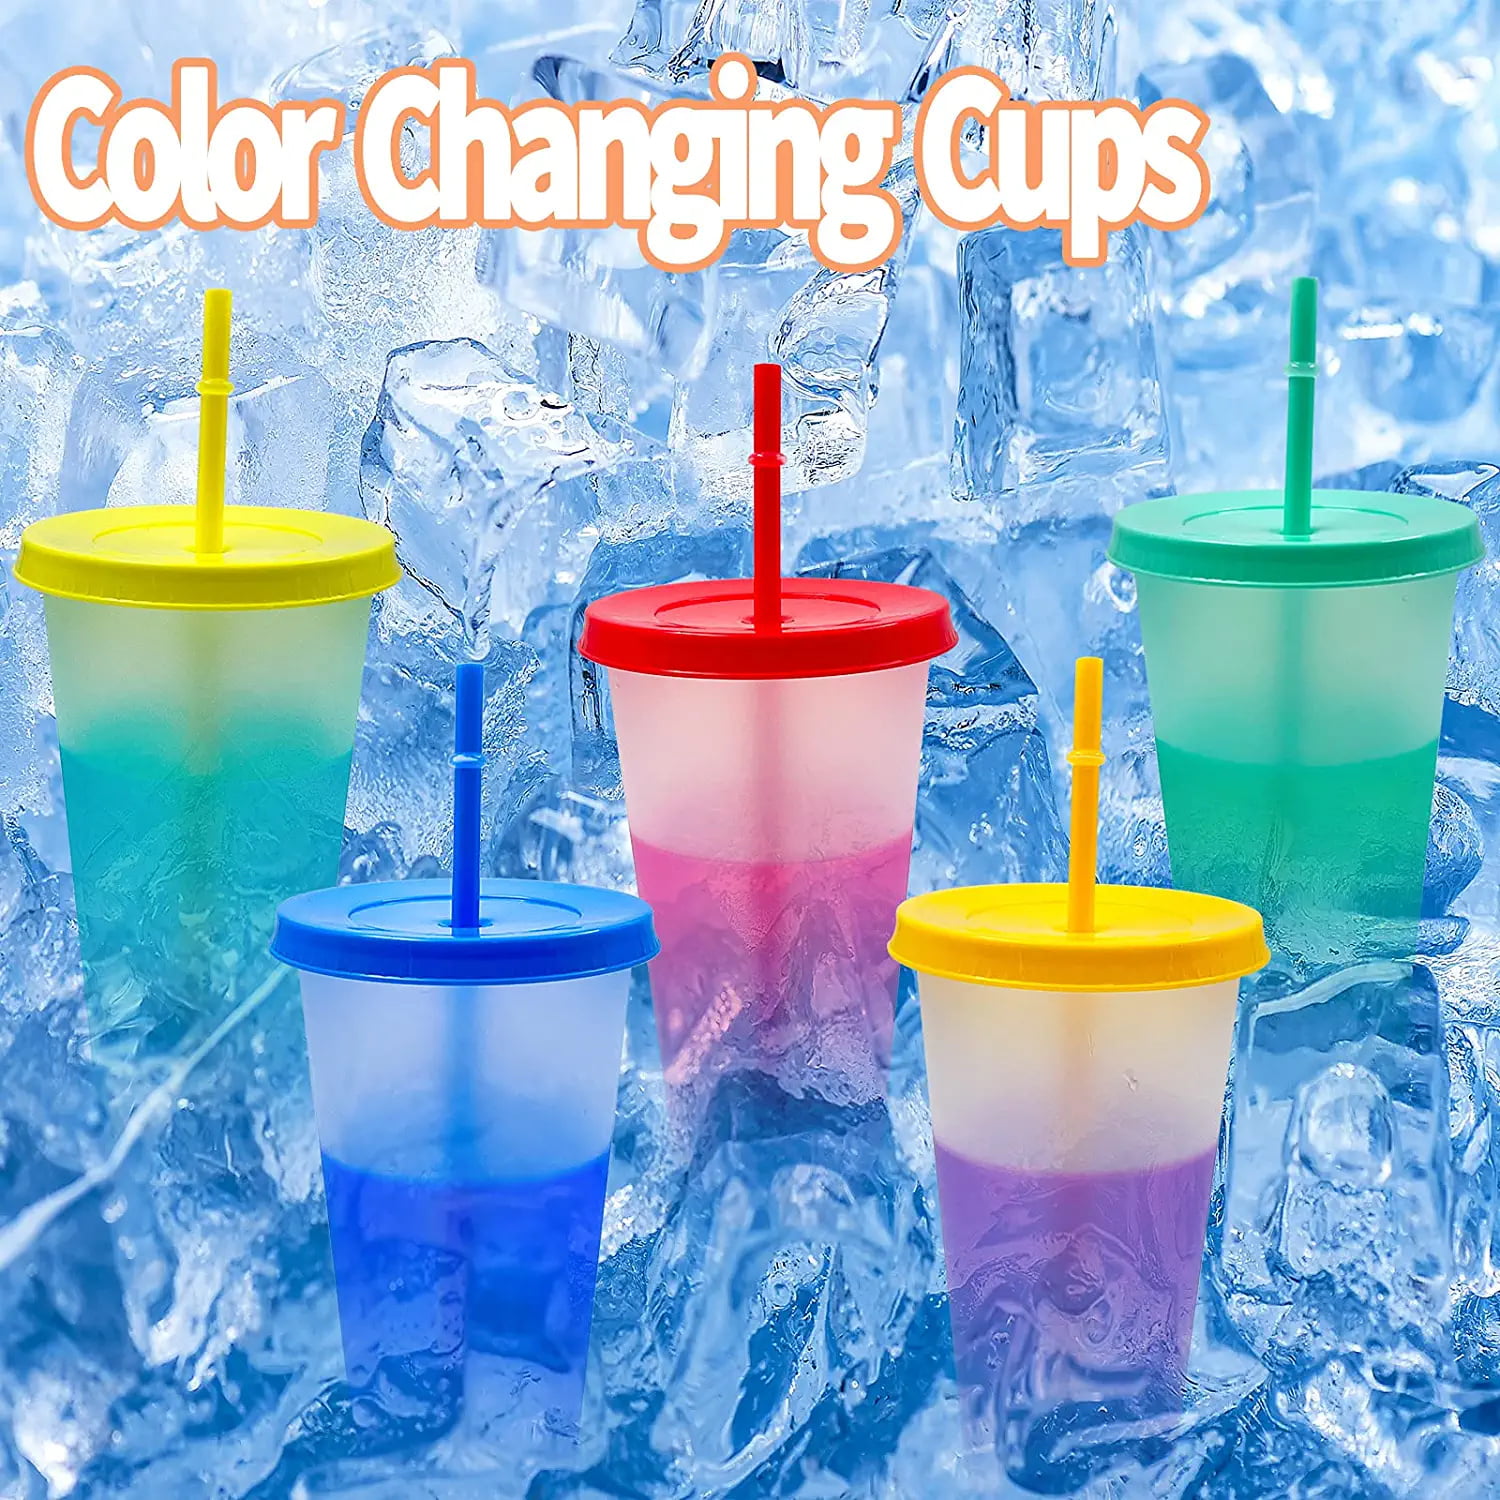 NOGIS 24oz Color Changing Plastic Tumblers,5 Pack Reusable Plastic Cups  with Lids and Straws,Color Changing Stadium Cup Coffee Cup Party Cup Summer  Cups for Parties and Gifts 